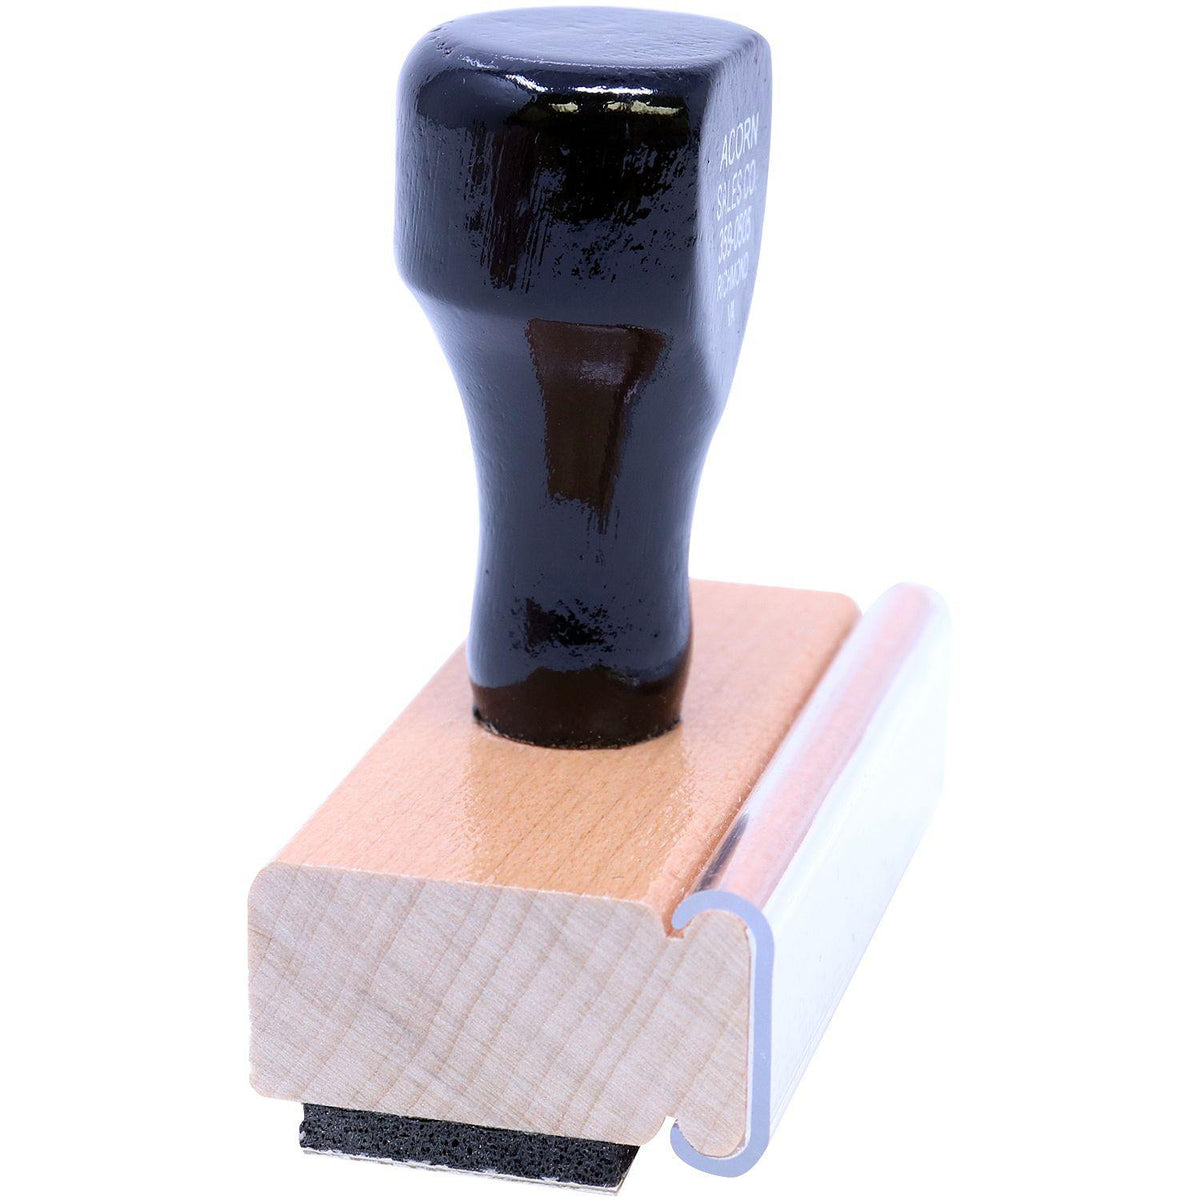 Side View of Deceased Date Rubber Stamp at an Angle